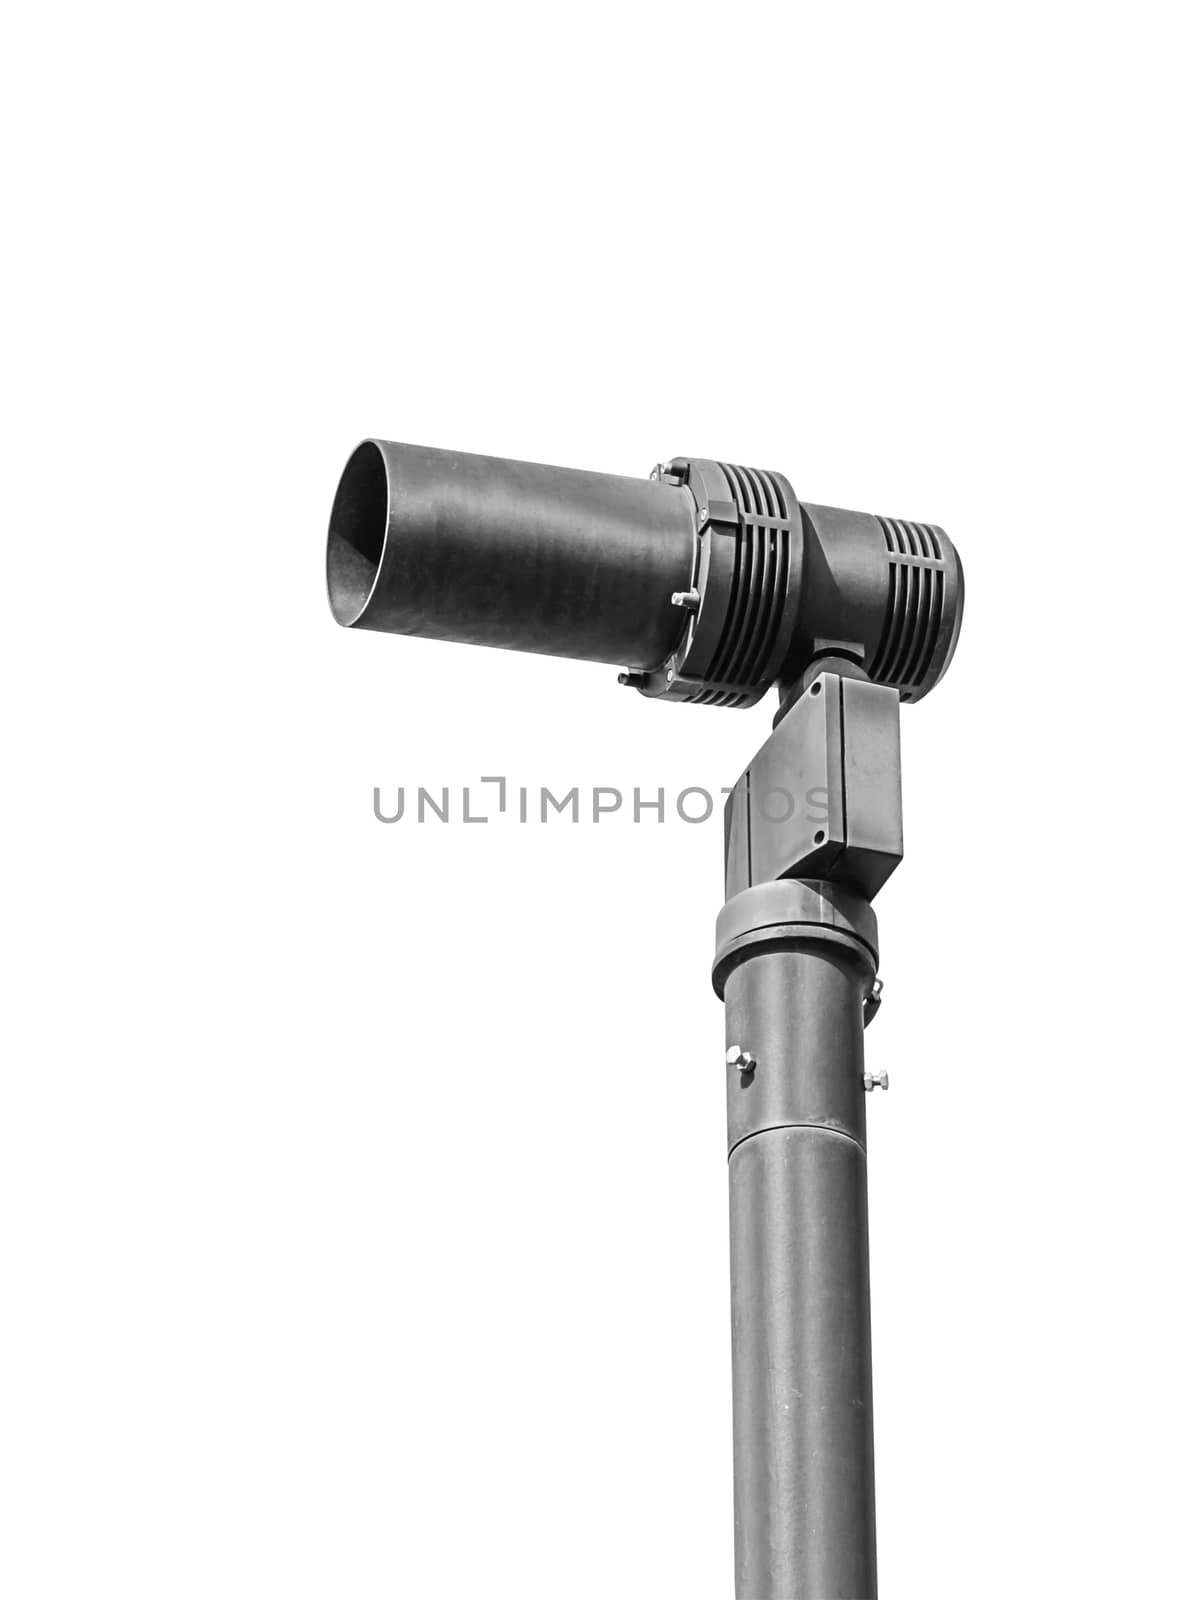 Spotlight pole isolated on white with clipping path